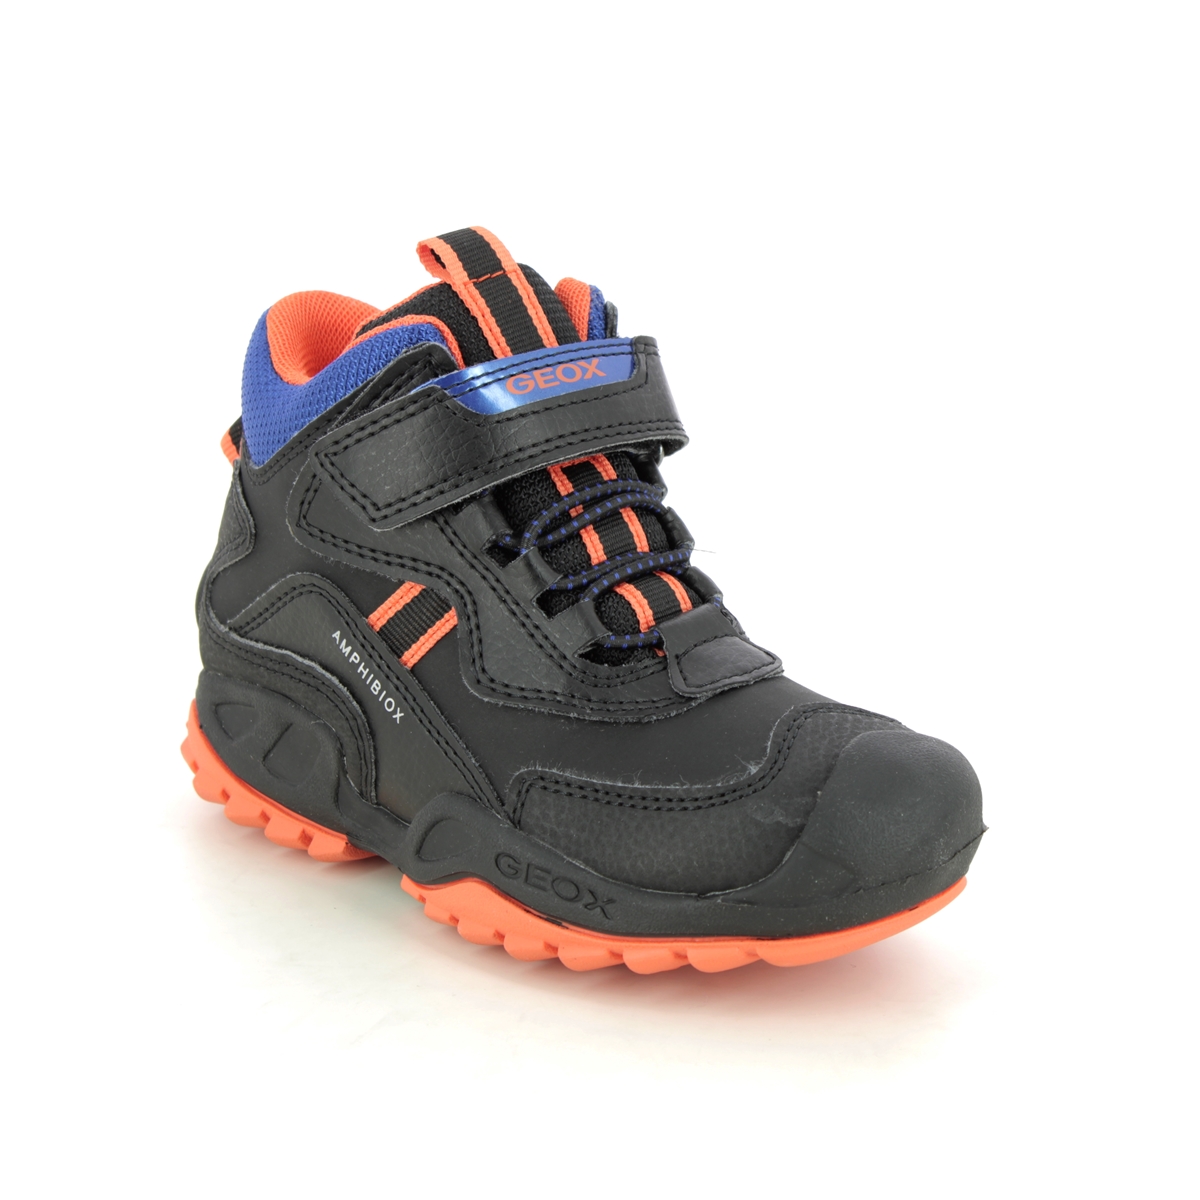 Geox - Savage Boot Tex (Black) J261Wb-C0399 In Size 28 In Plain Black For School For kids